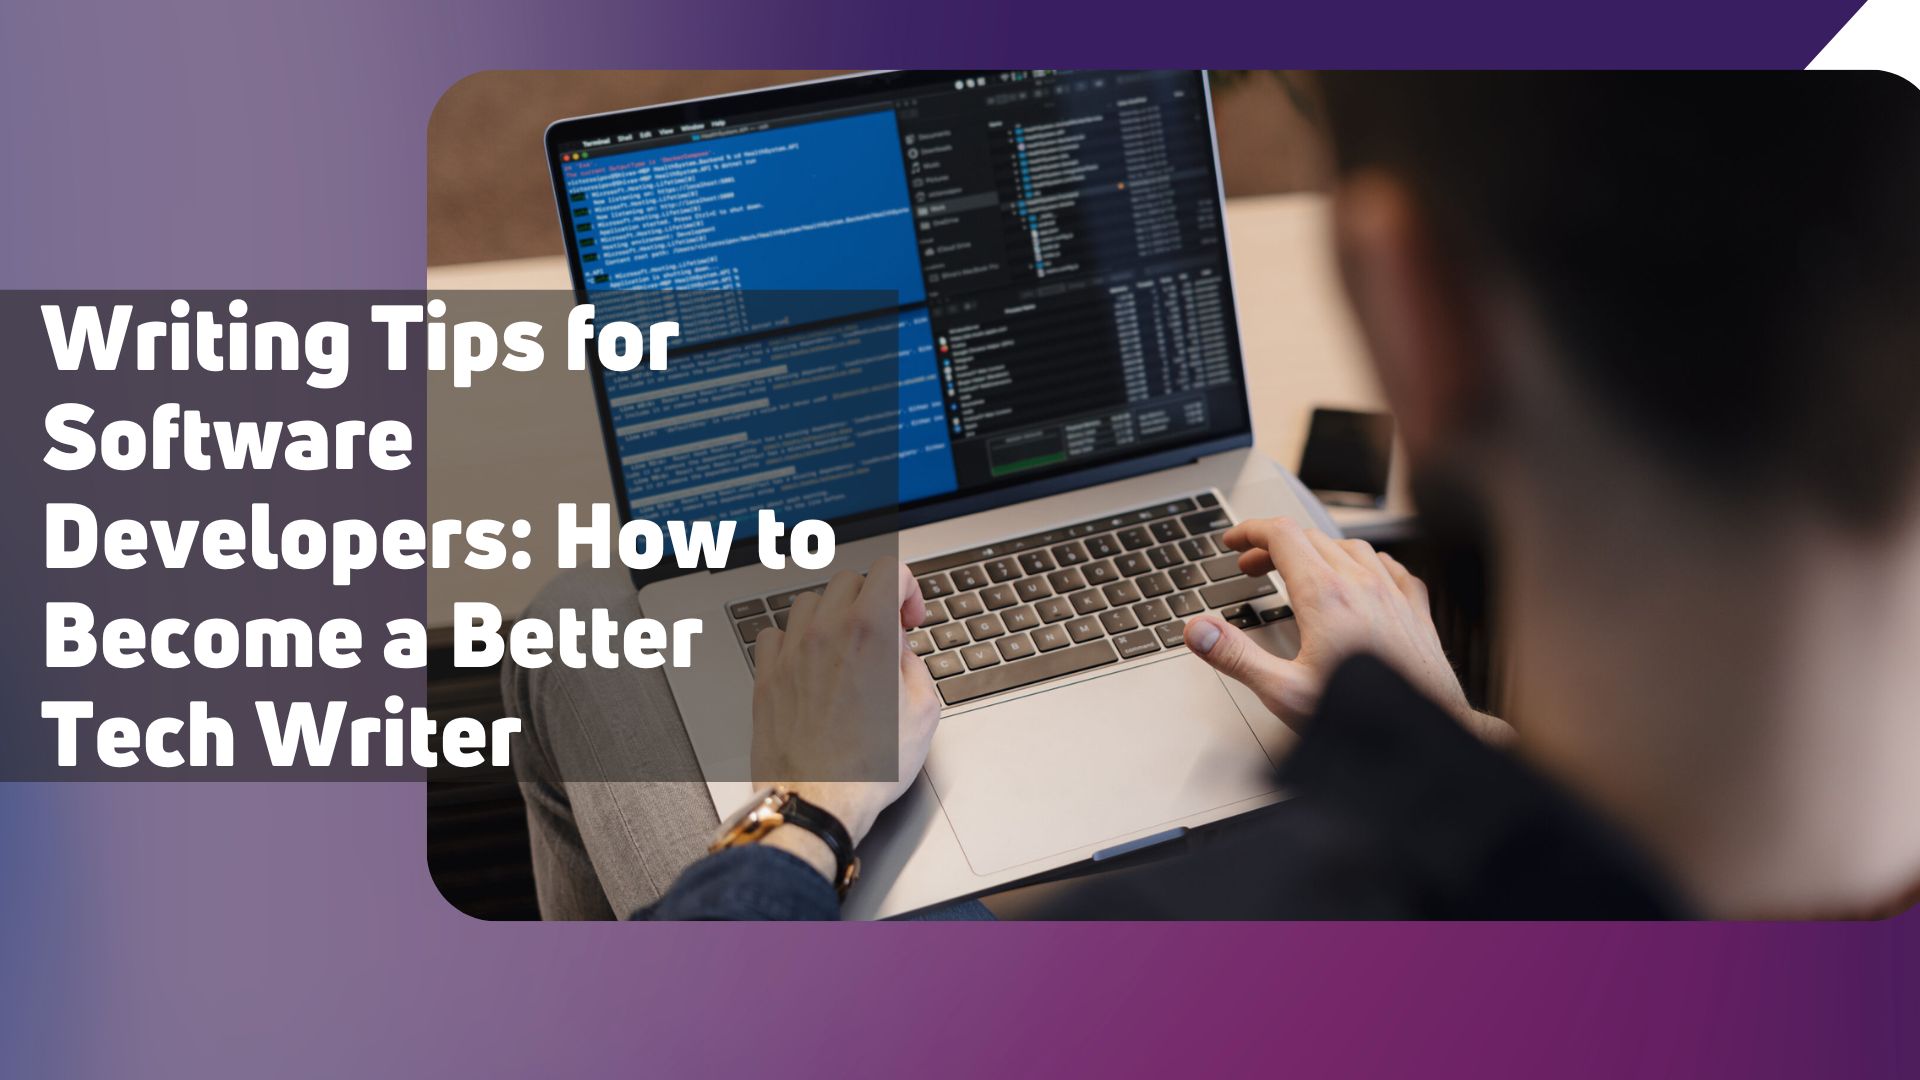 Writing Tips for Software Developers: How to Become a Better Tech Writer